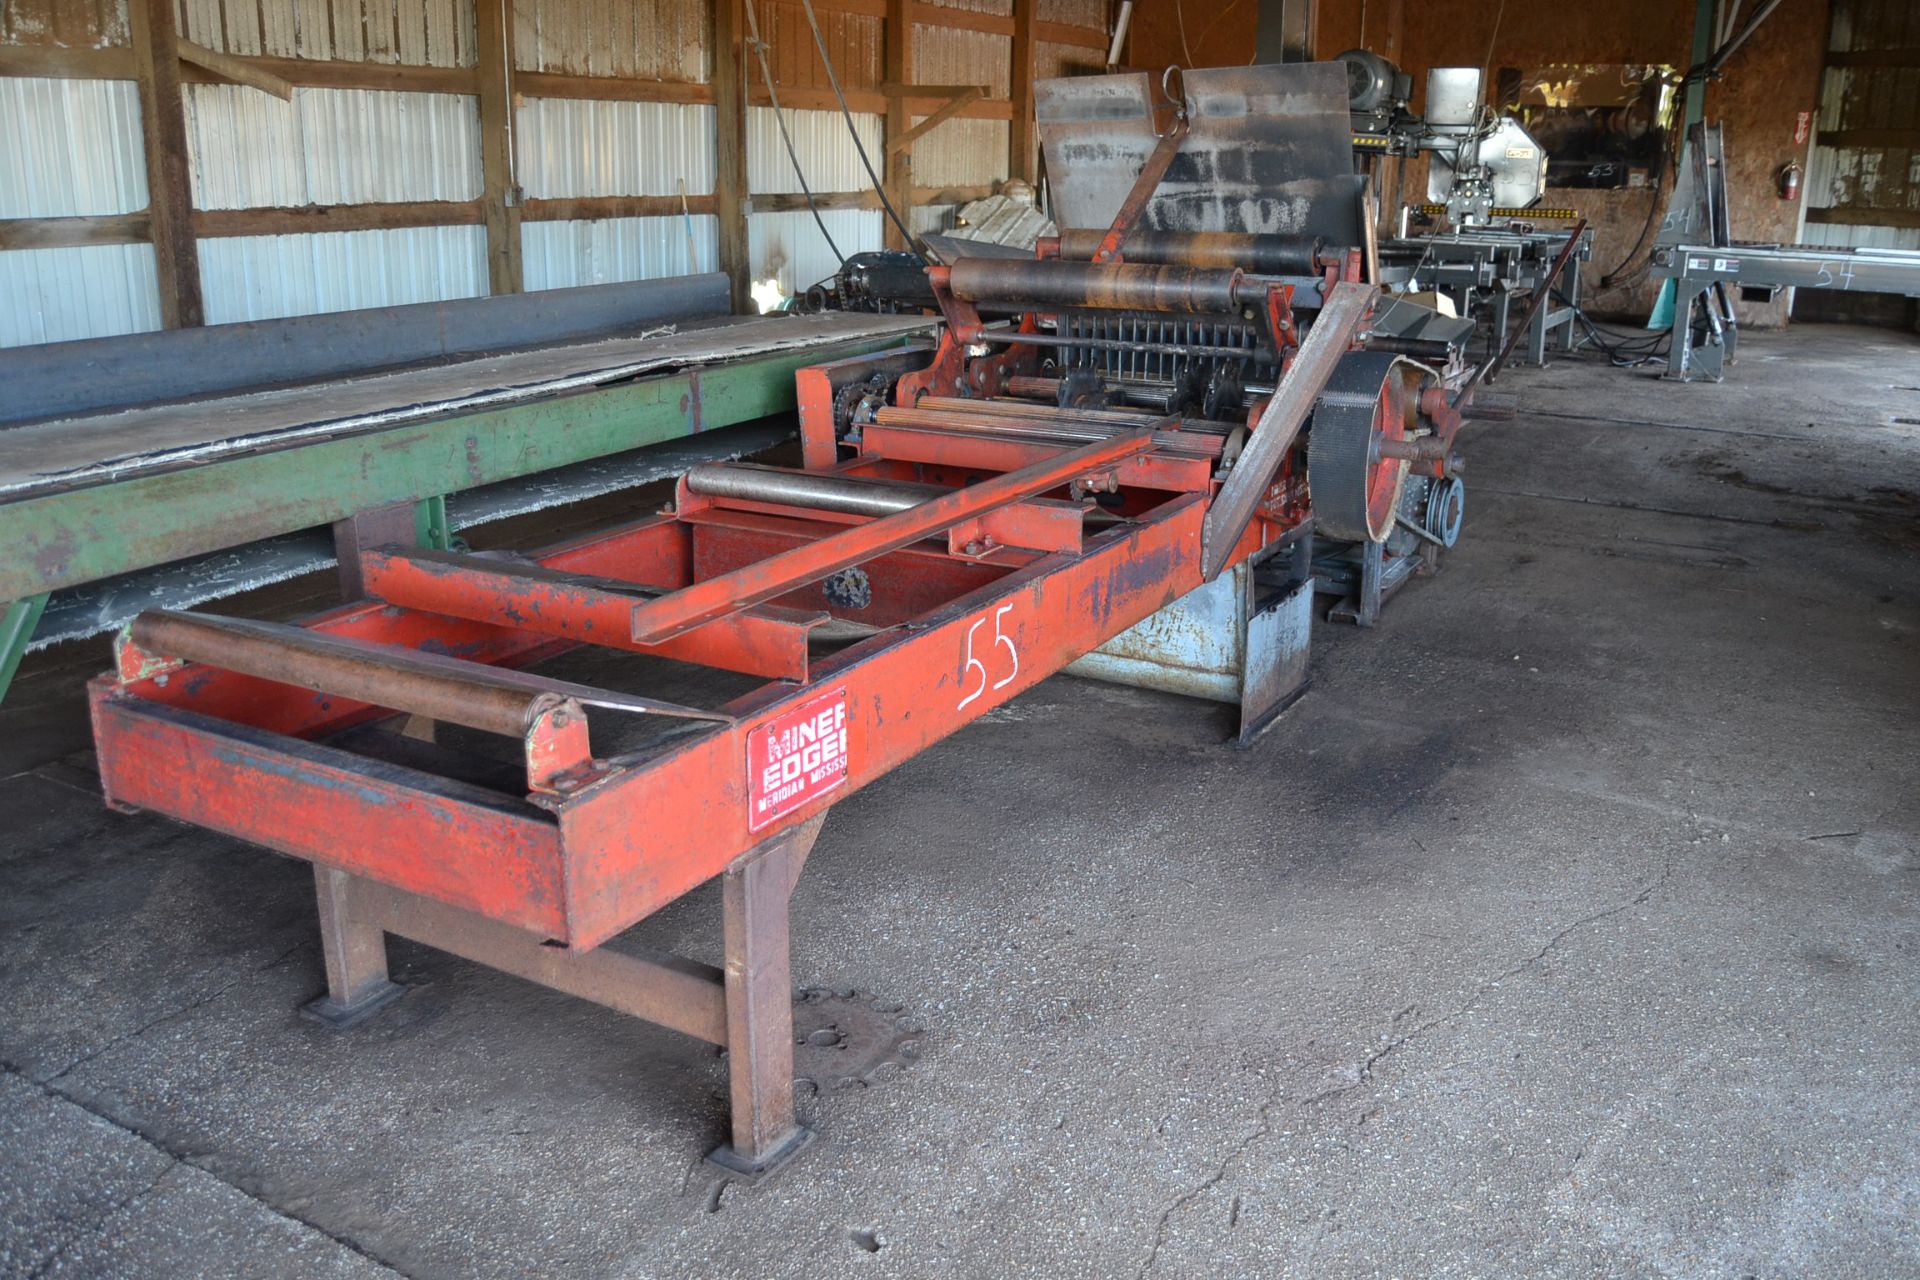 MINER 36" 3 SAW EDGER W/ (1) MOVABLE SAW W/ INFEED & OUTFEED W/ 30HP MOTOR - Image 2 of 2